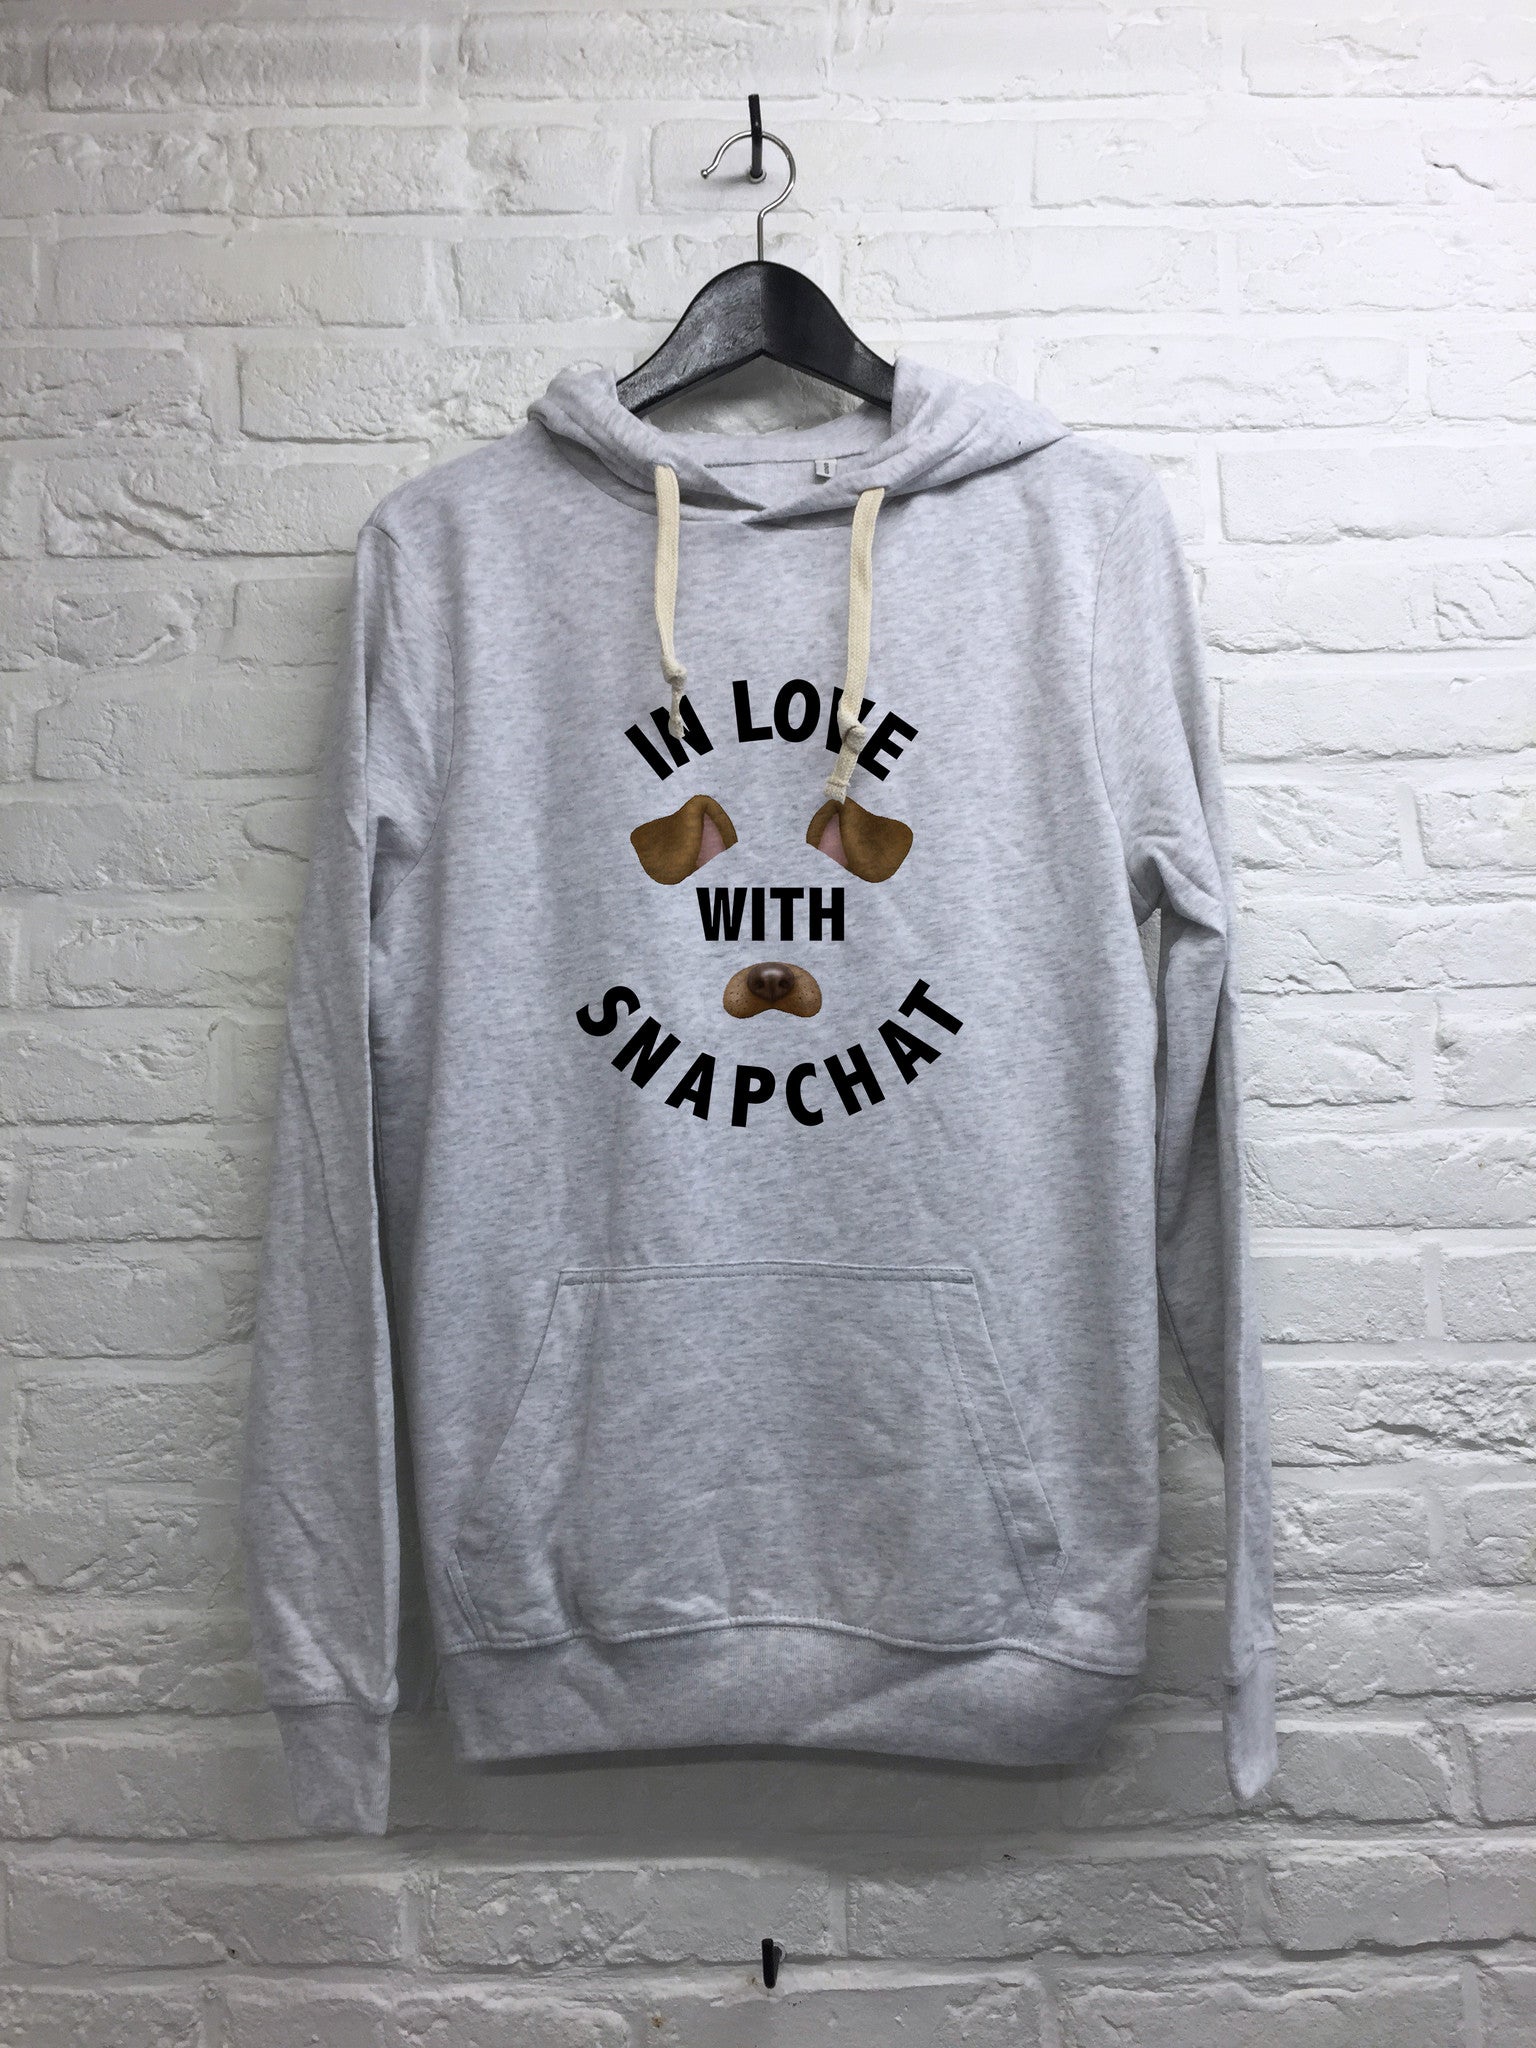 In love with Snapchat - Hoodie super soft touch-Sweat shirts-Atelier Amelot